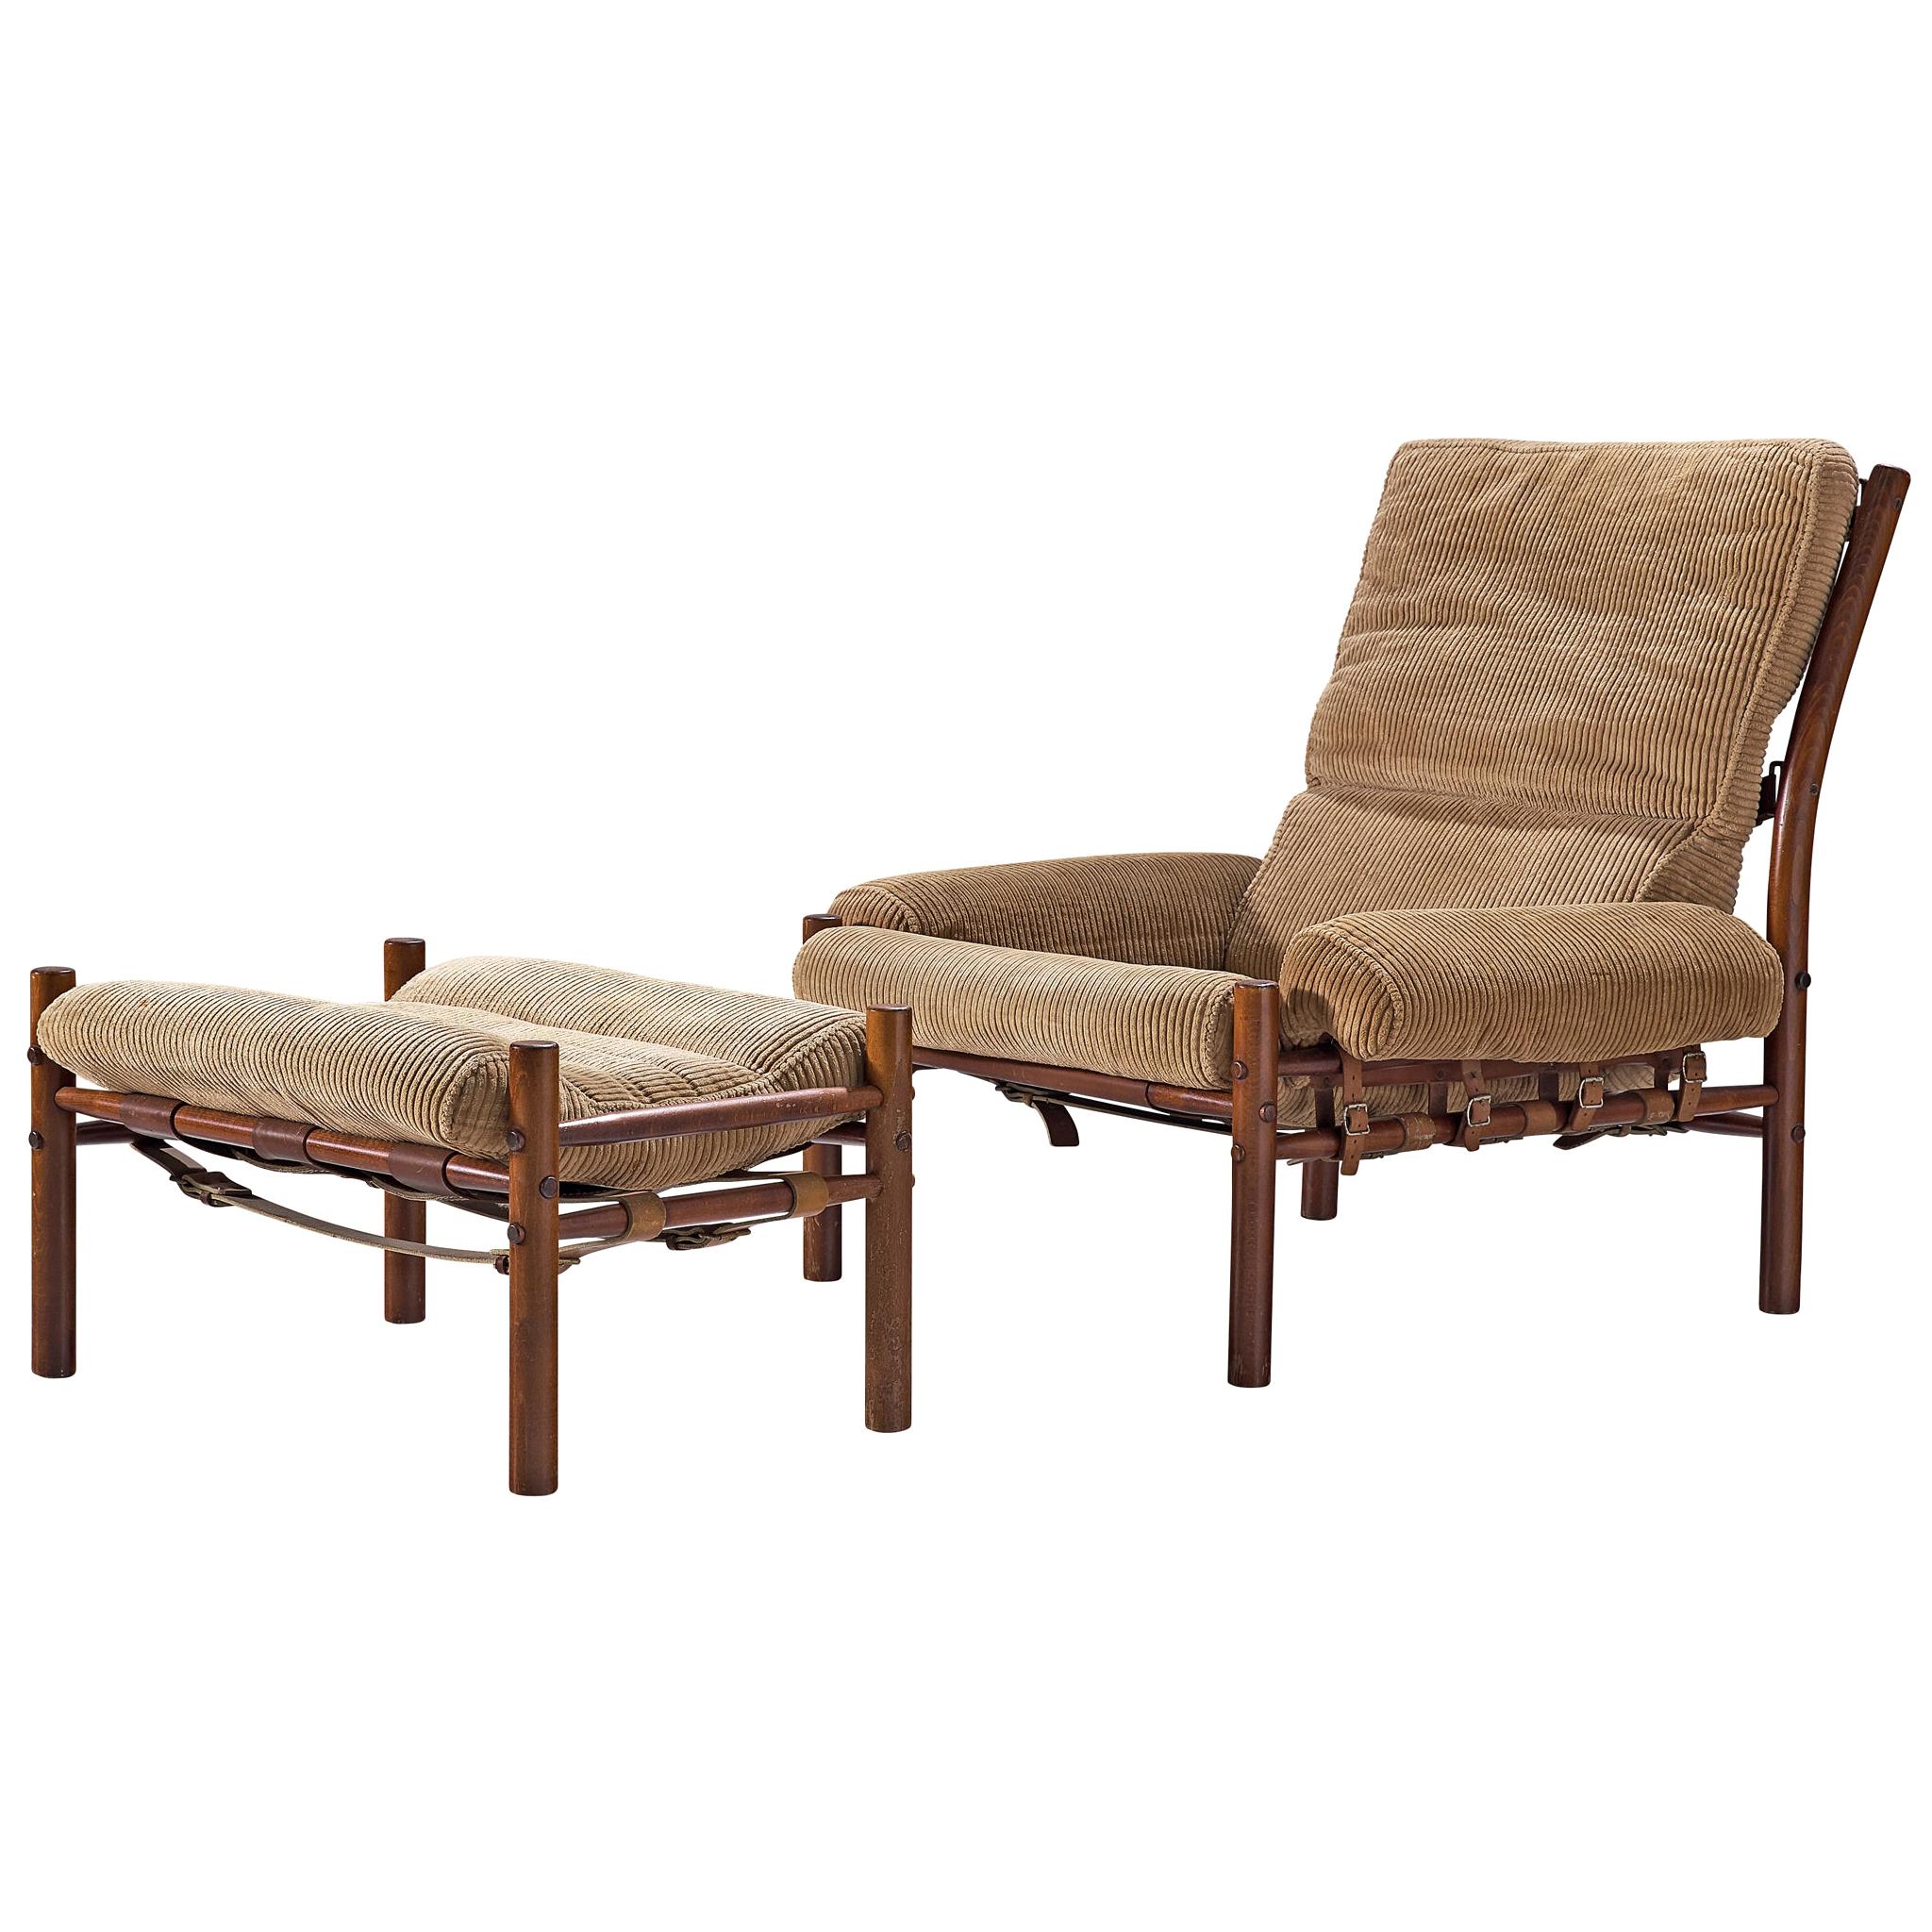 Arne Norell 'Inca' Lounge Chair with Ottoman in Corduroy